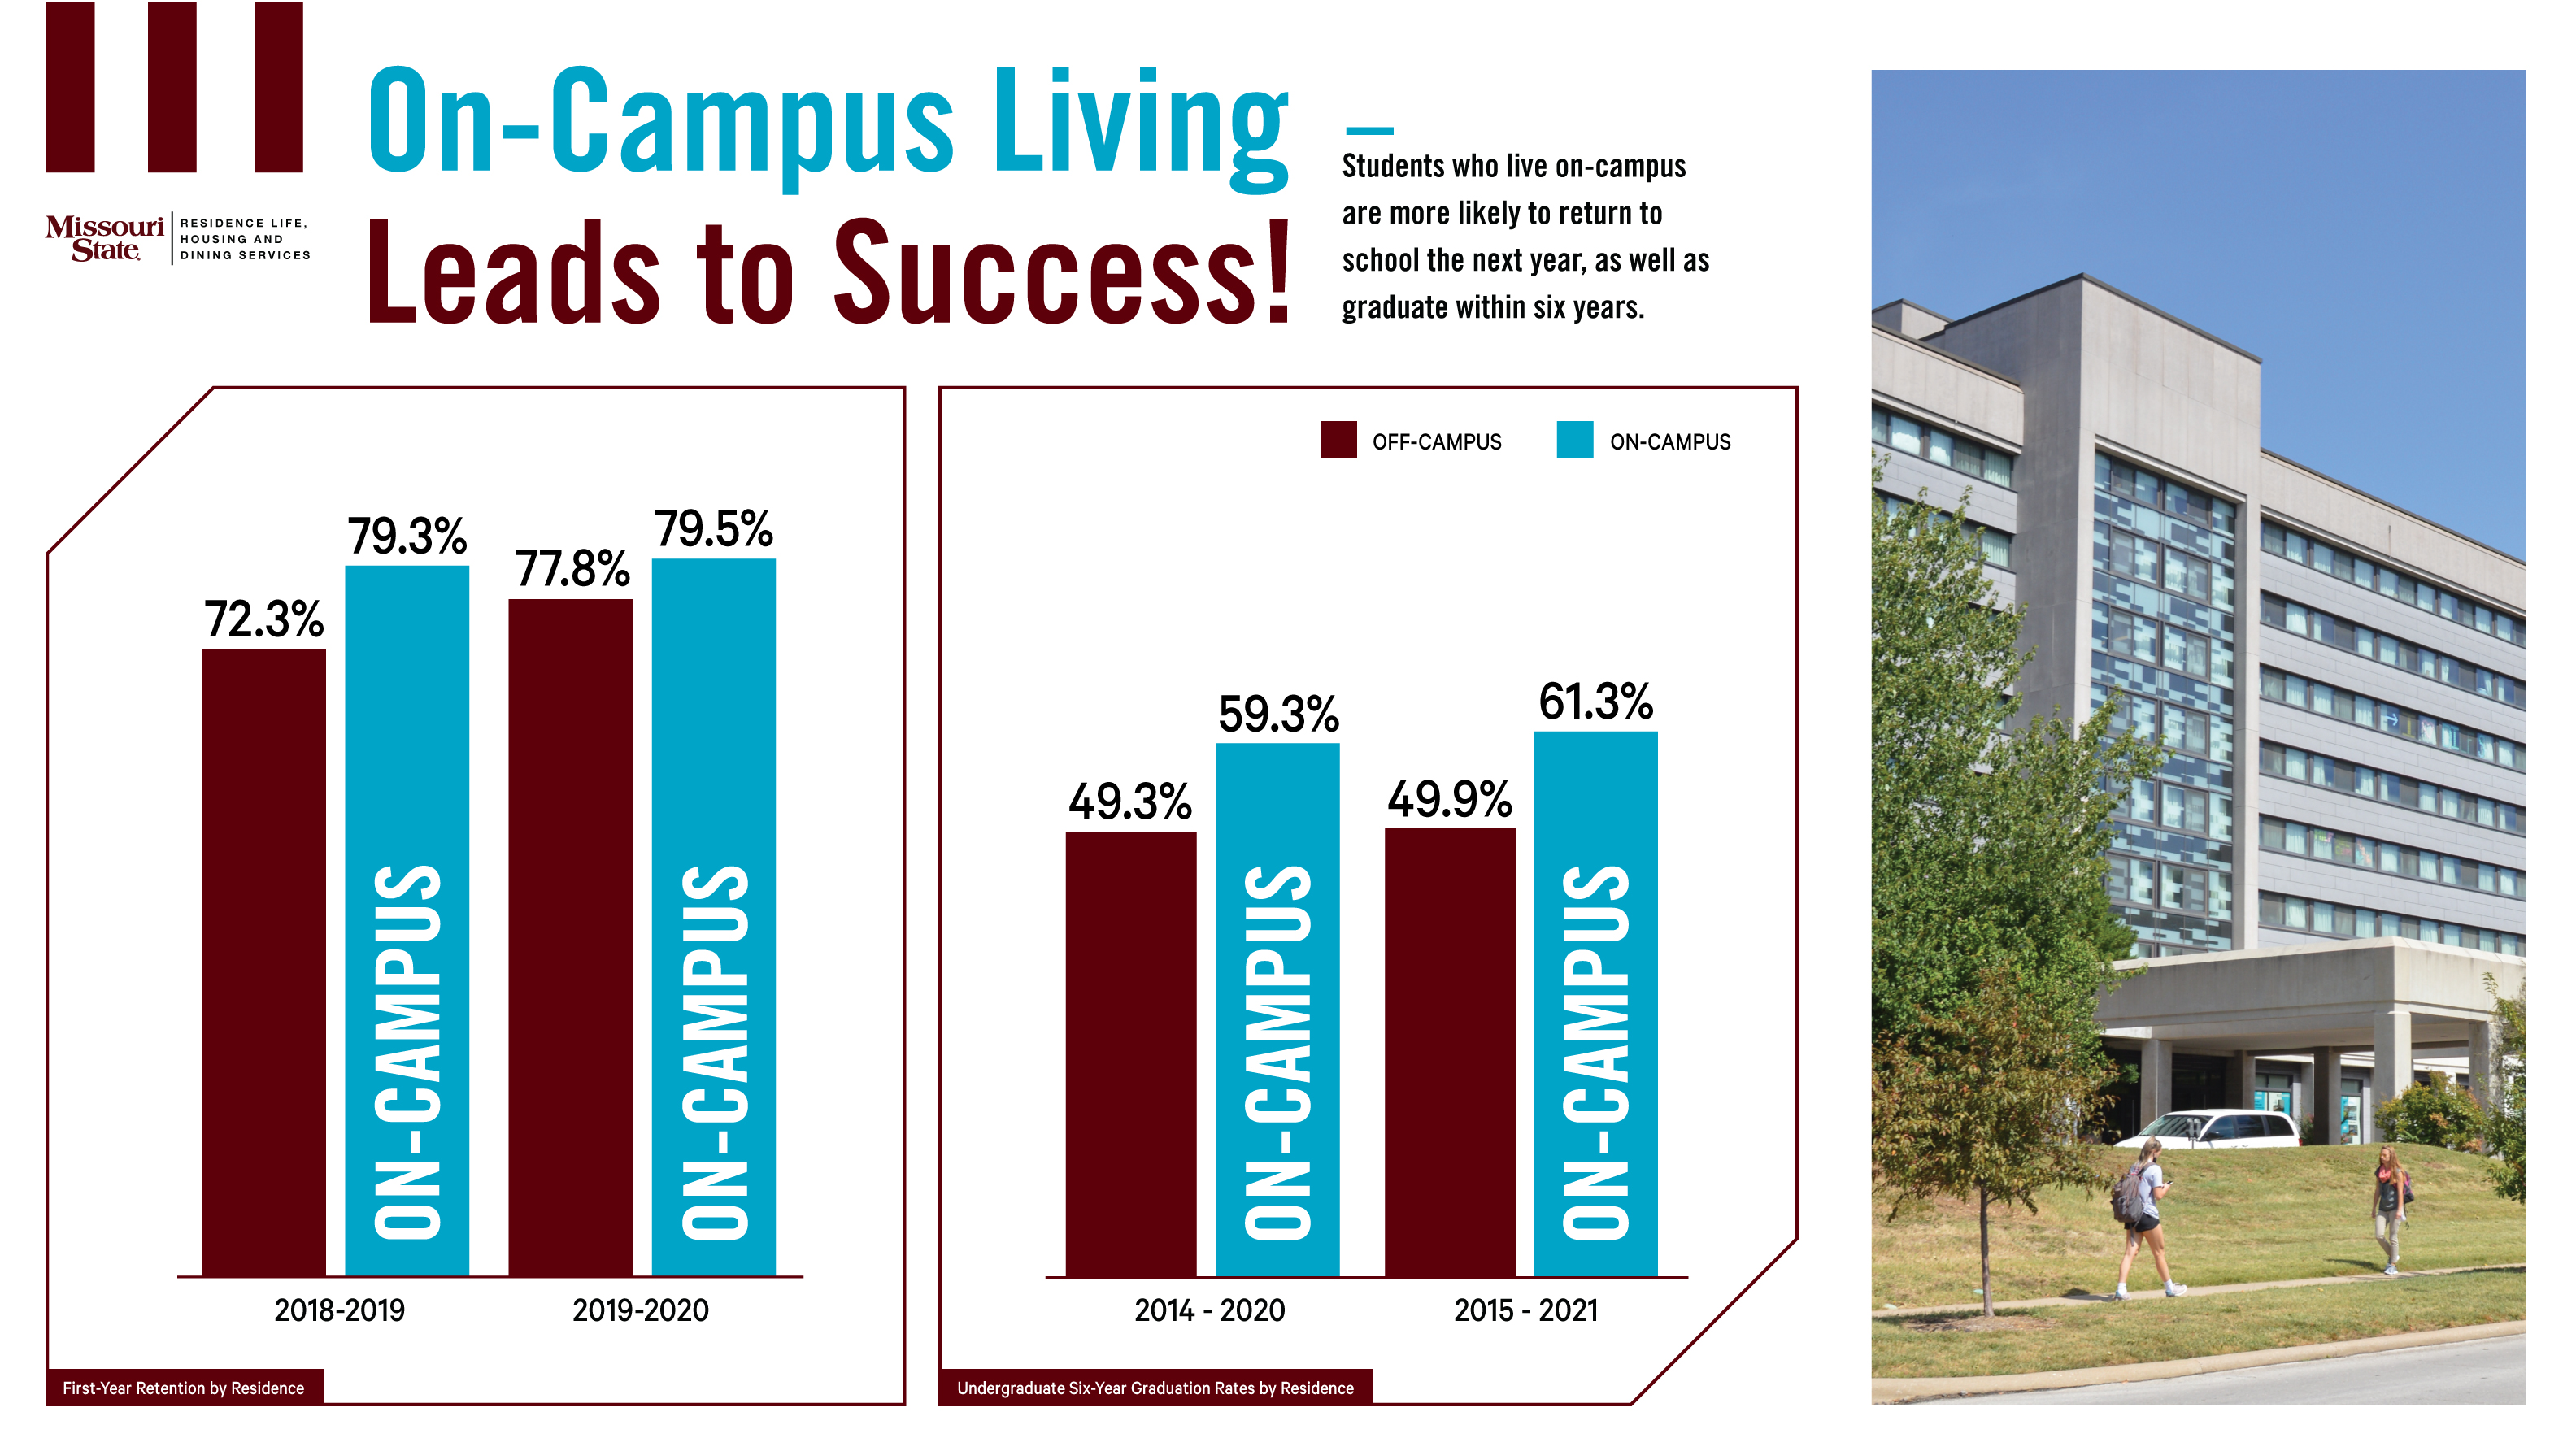 Info graphic showing on campus students are more likely to return and graduate than off campus students. 